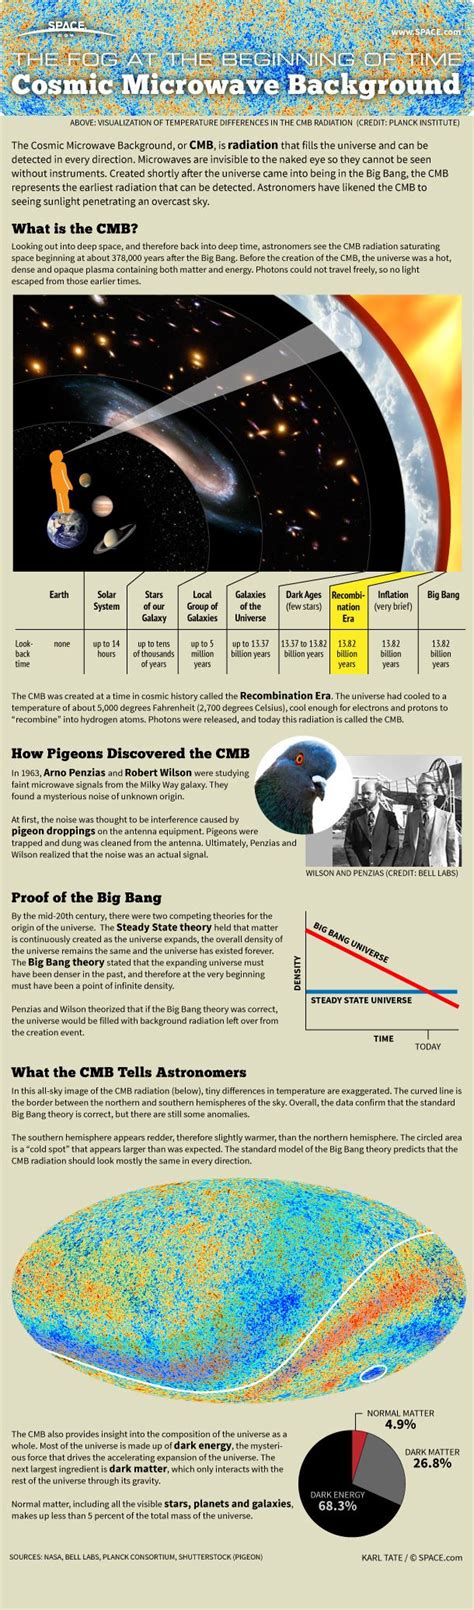 Cosmic Microwave Background: Big Bang Relic Explained (Infographic) | Space